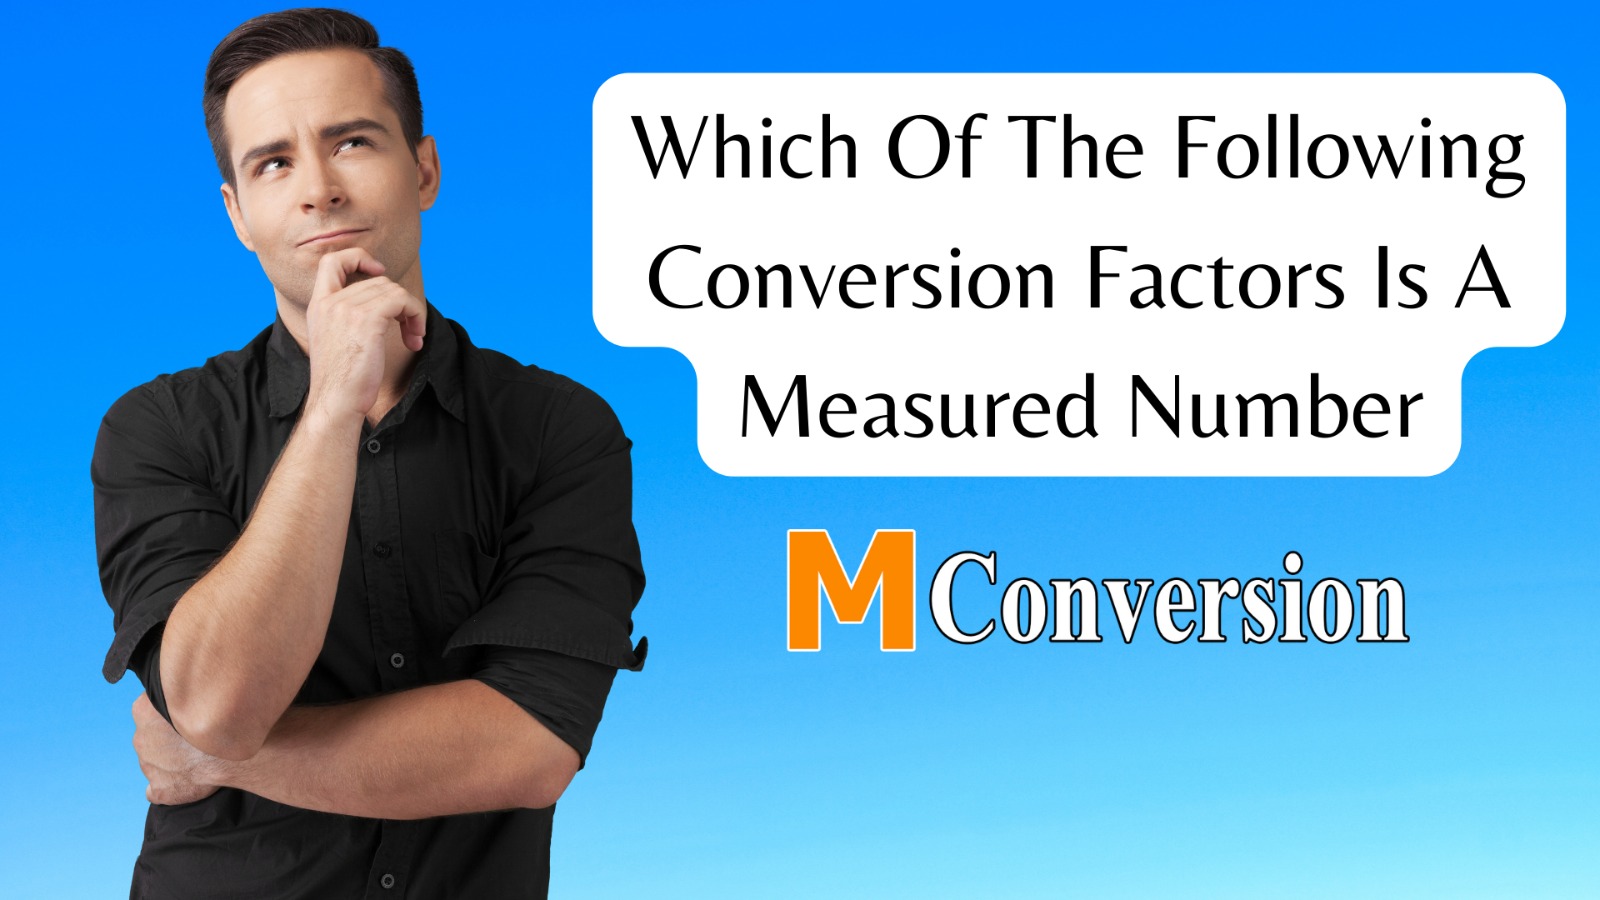 Which of the Following Conversion Factors is a Measured Number